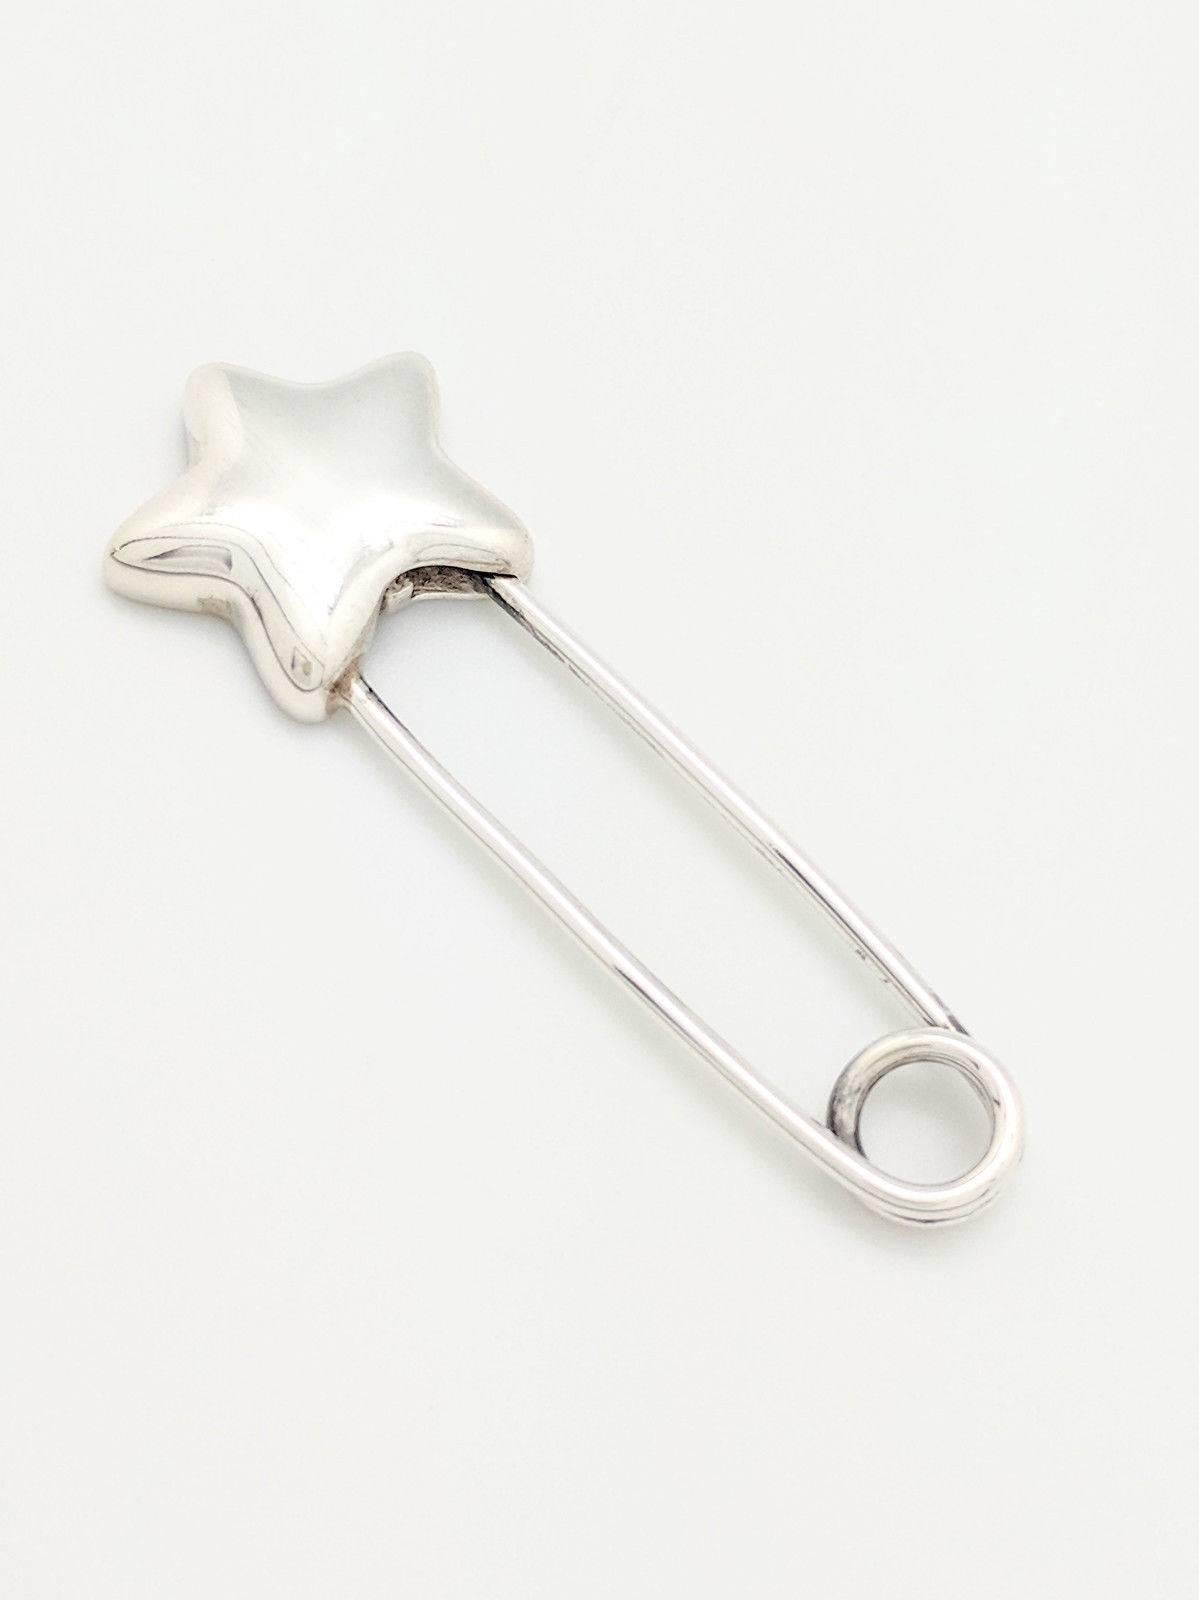 Authentic Tiffany & Co Sterling Silver STAR Diaper Safety Pin Brooch with Pouch

You are viewing an Authentic Tiffany Co. STAR Diaper Safety Pin/Brooch. This piece is crafted from sterling silver and weighs 12.1 grams. The pin/brooch measures 3 1/4